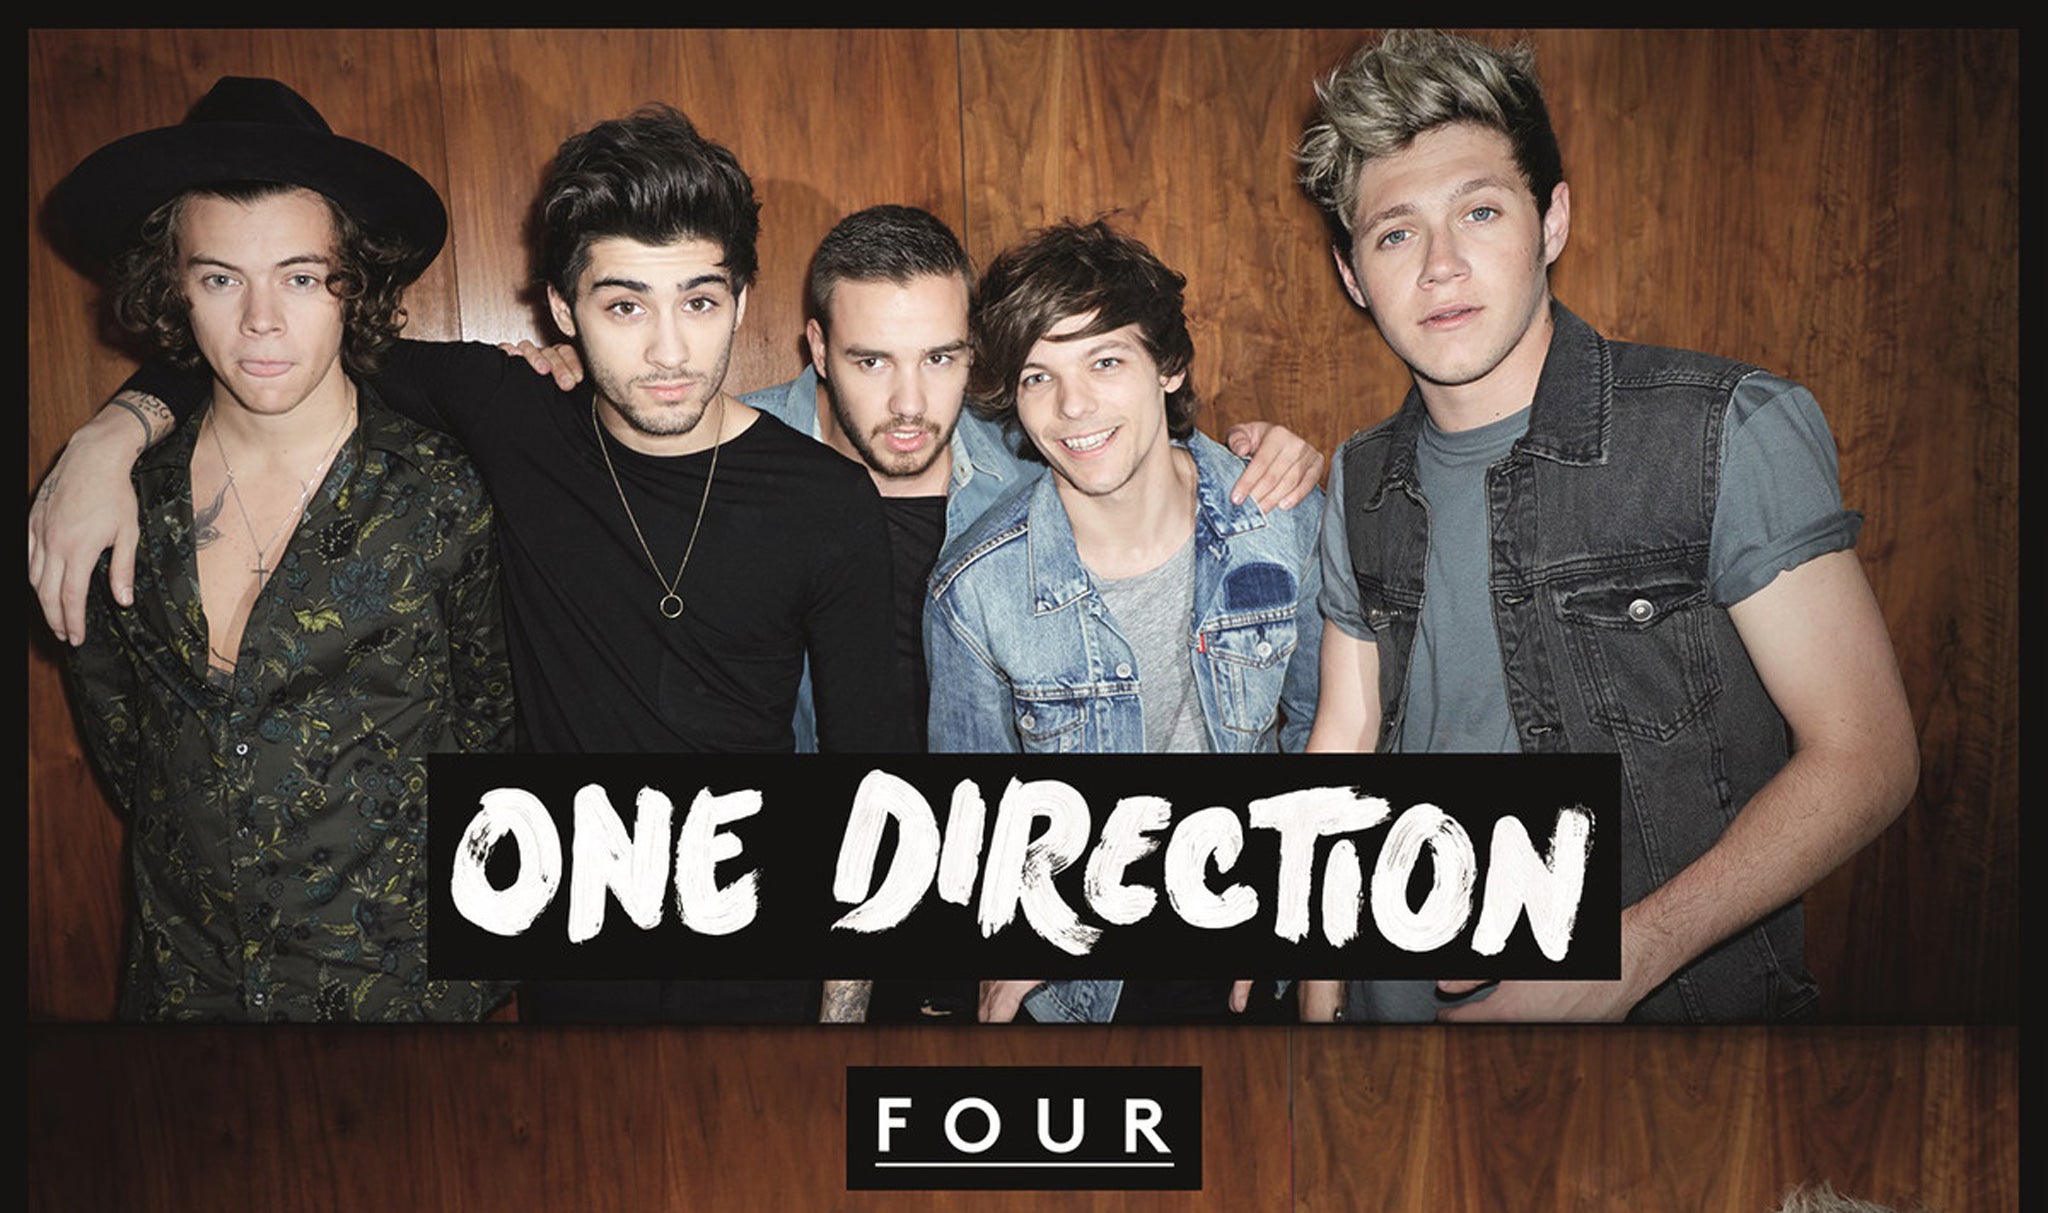 One Direction, Four - album review: A long way from the standard X